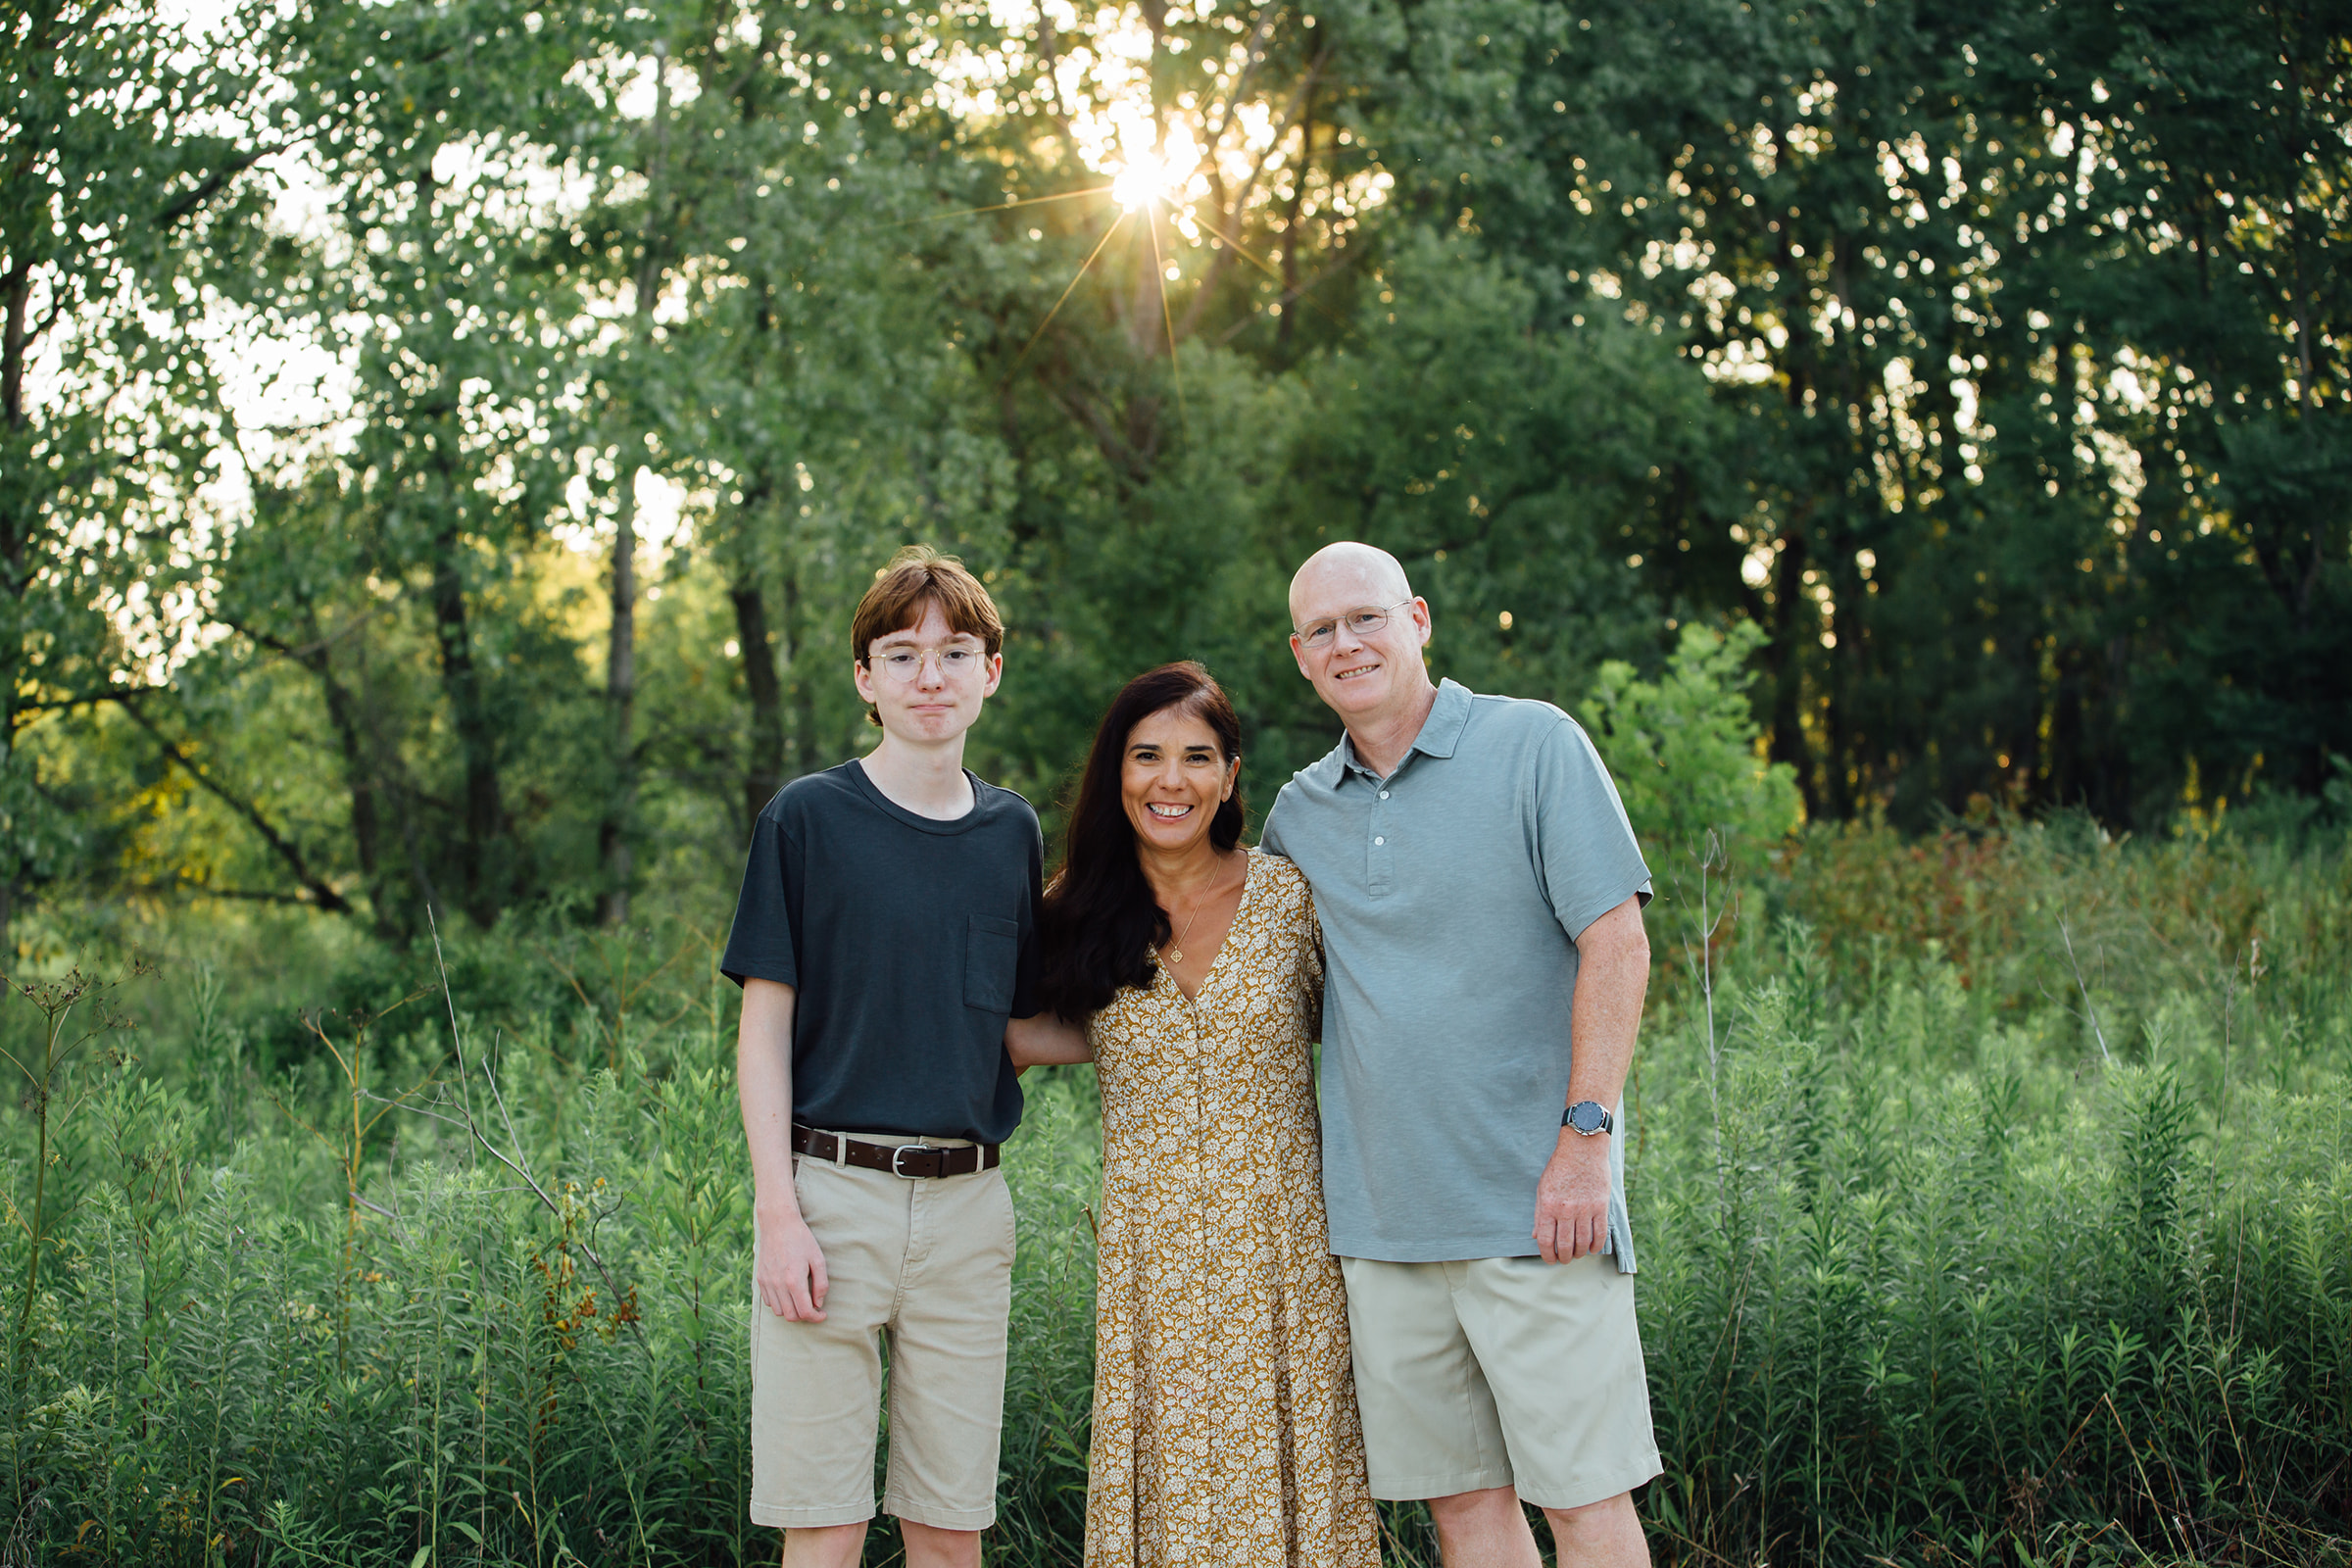 Outdoor family session in Naperville, IL with their pet dog.